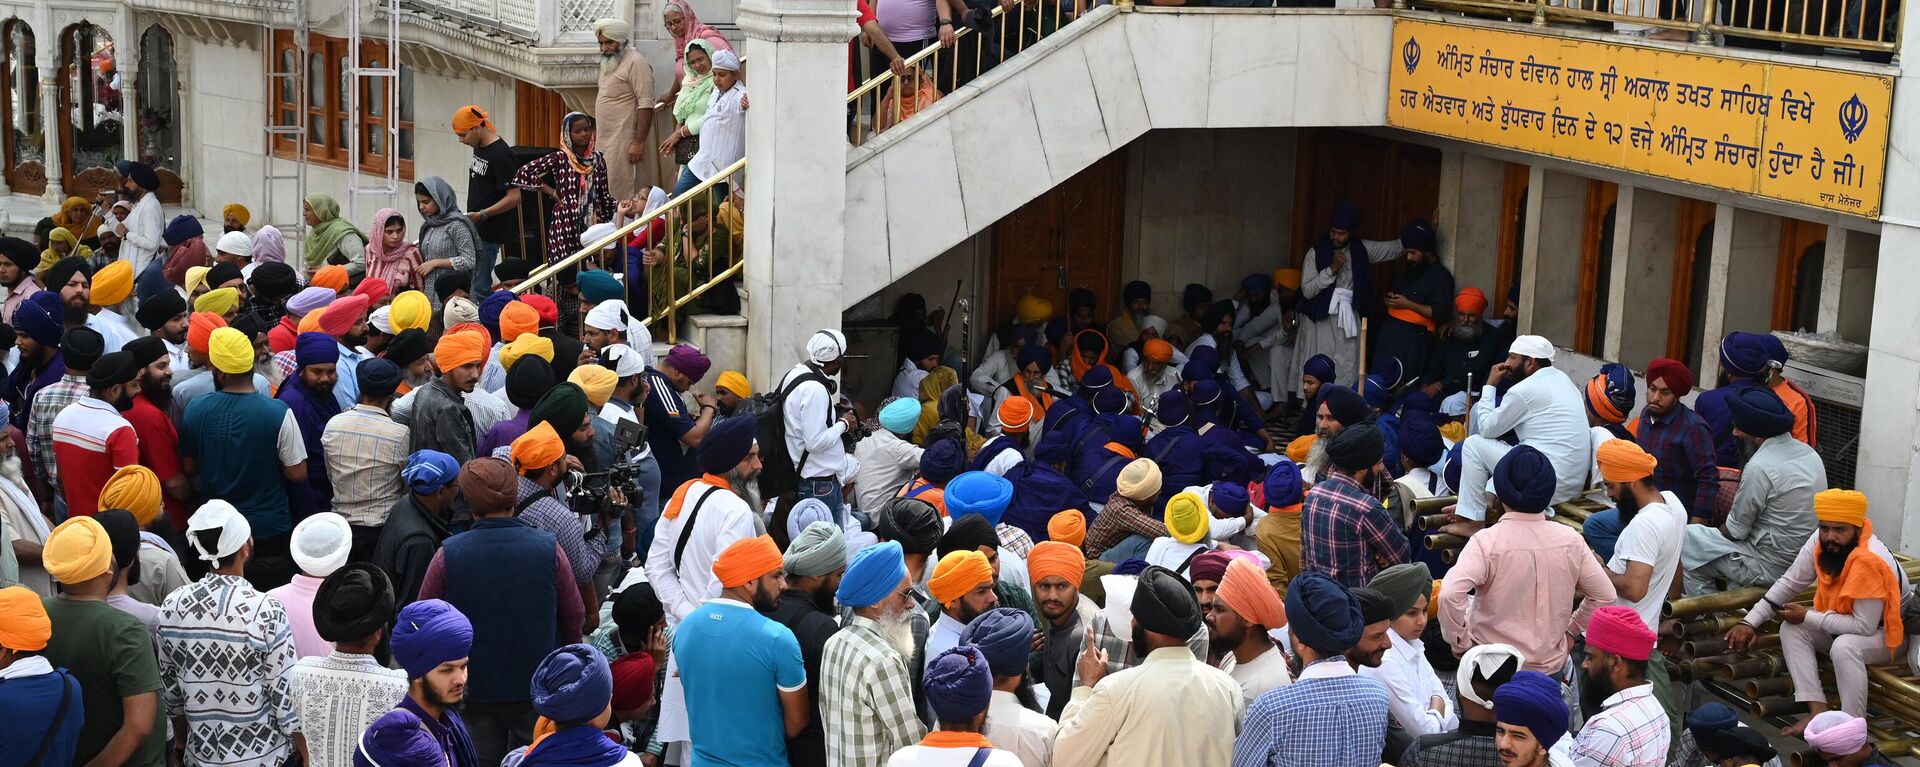 Supporters of 'Waris Punjab De' chief Amritpal Singh, gather for a special meeting at the Golden Temple in Amritsar on March 27, 2023. - Sputnik भारत, 1920, 31.03.2023